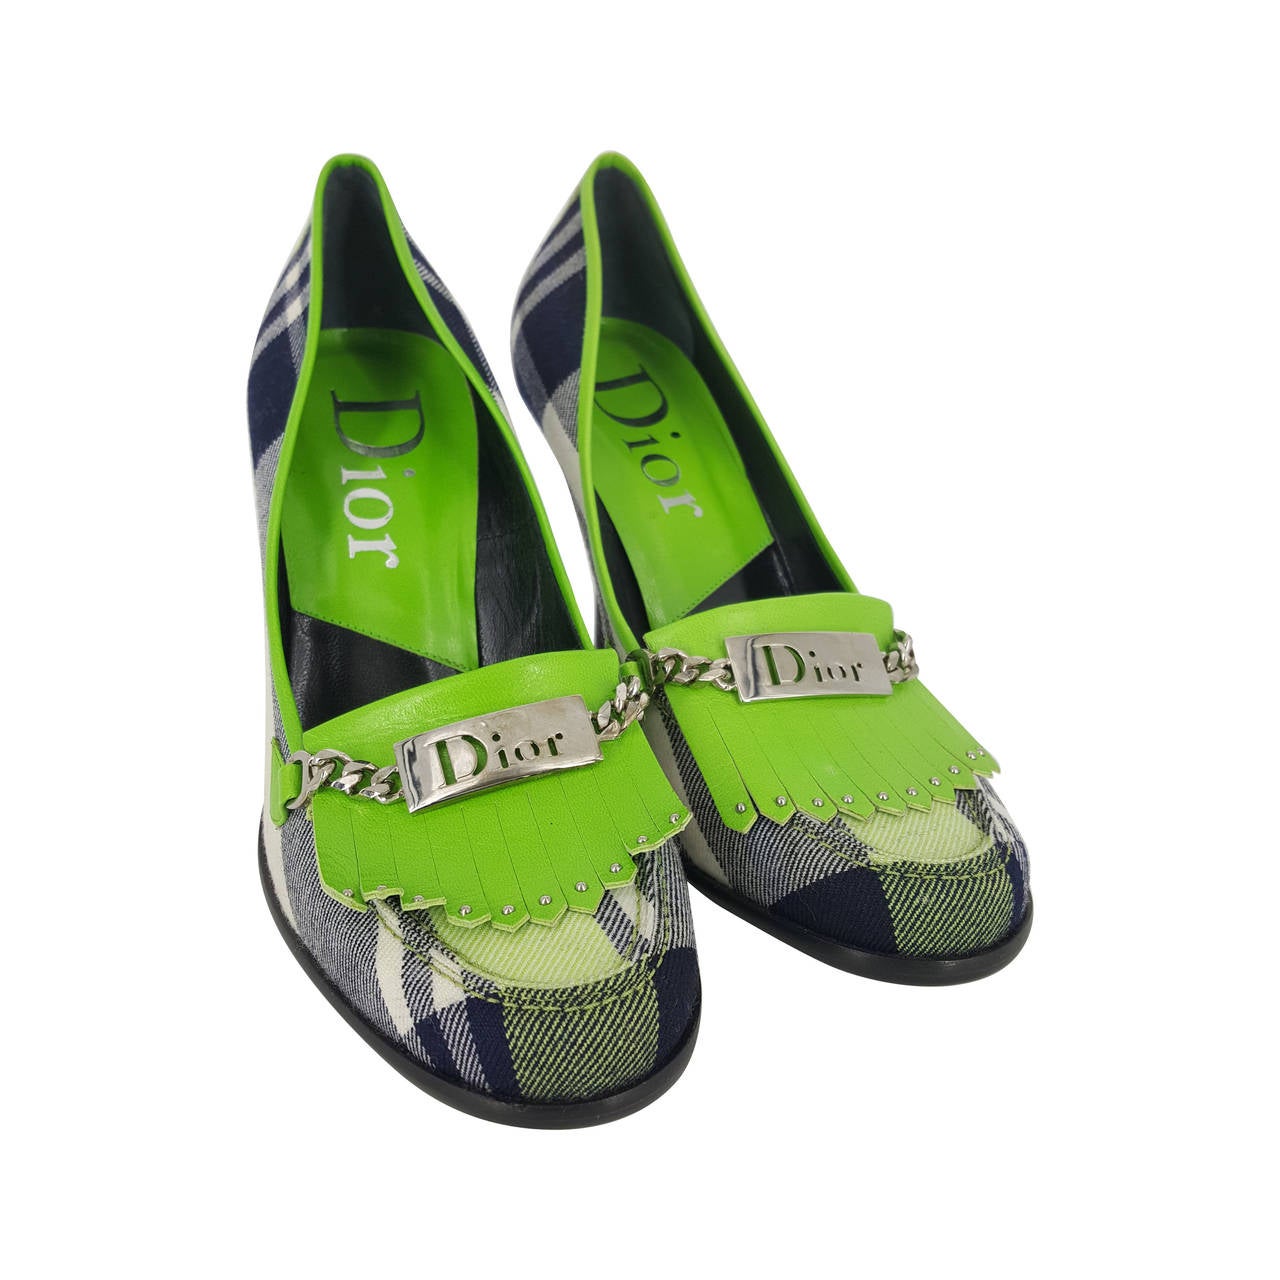 Christian Dior Vibrant Plaid Flannel Pumps in size 36 1/2 For Sale